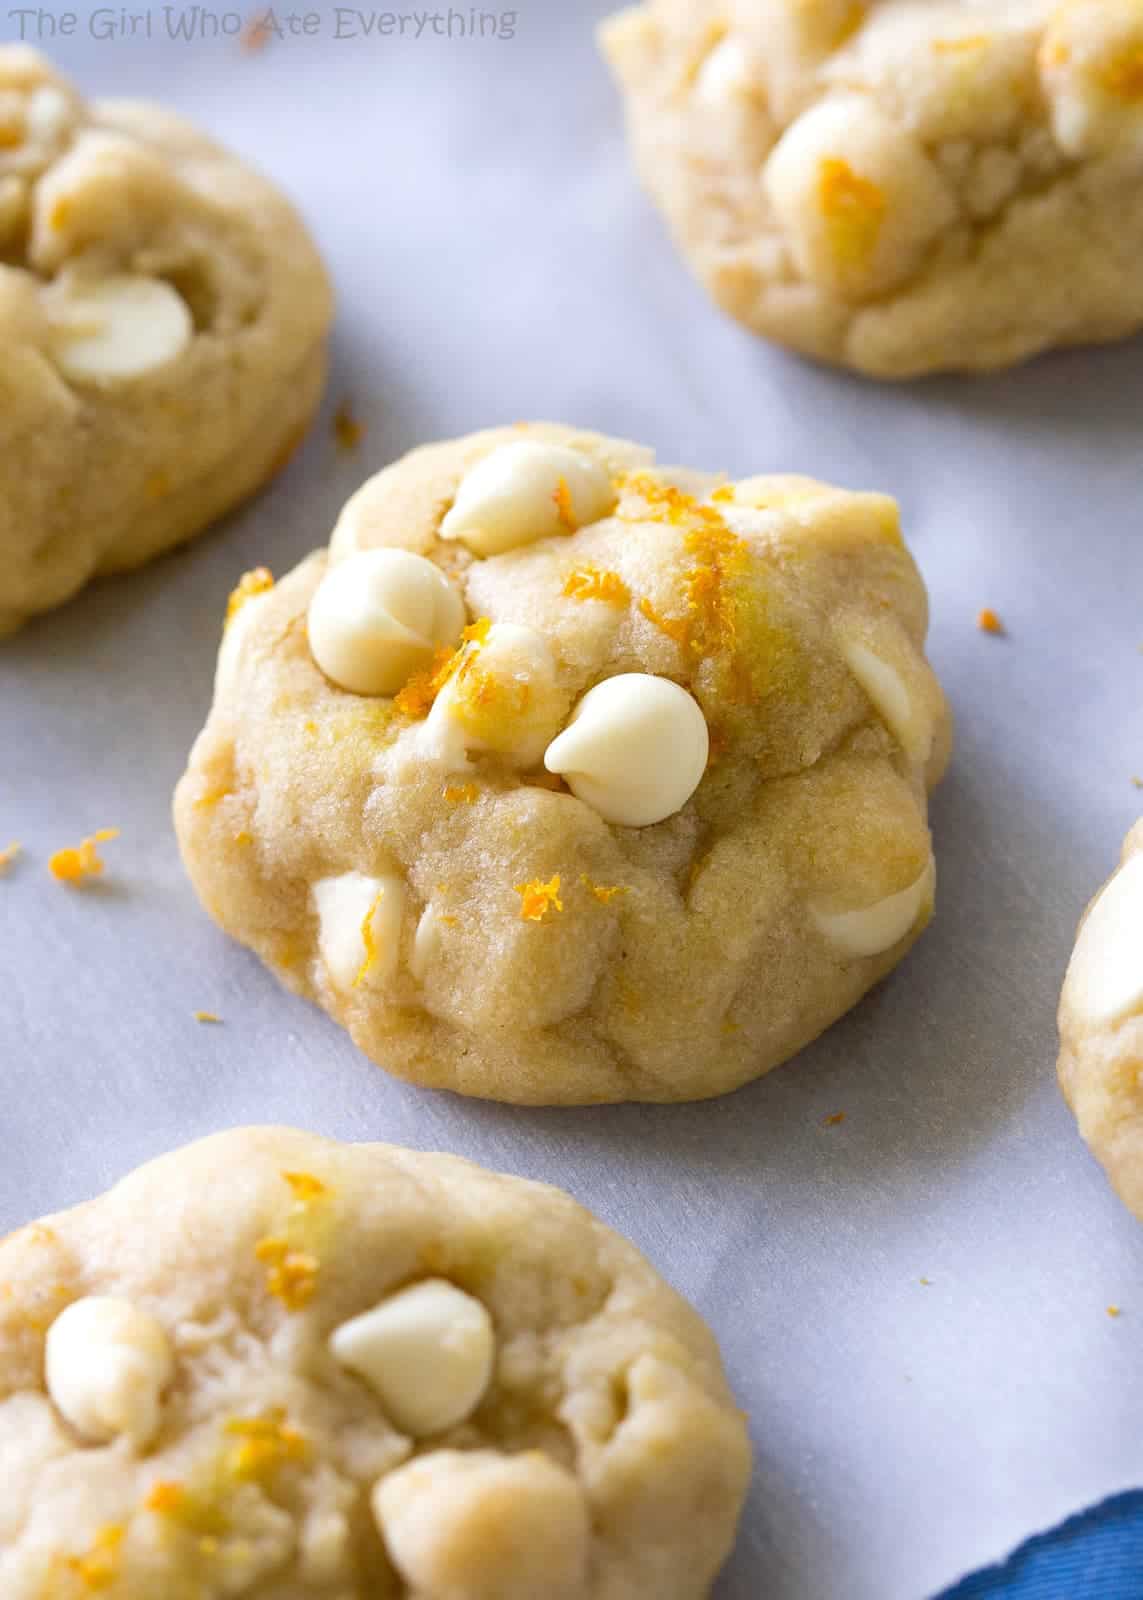 Orange Creamsicle Cookies - soft cookies with white chocolate chips and orange zest. Taste just like the popsicle. the-girl-who-ate-everything.com